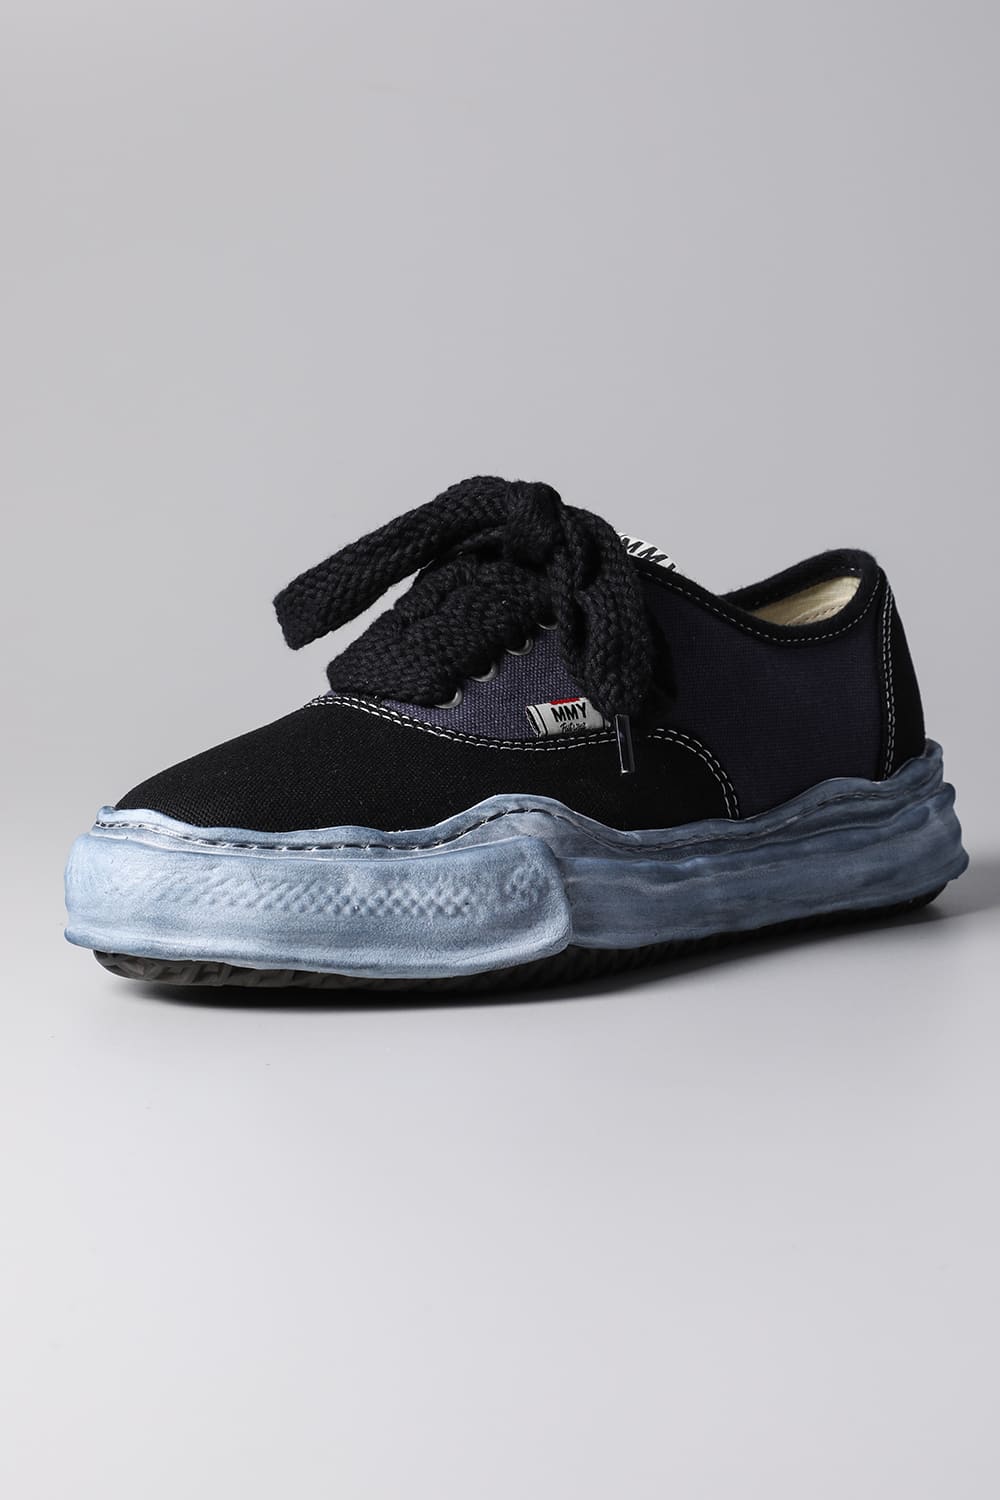 -BAKER- Original sole over-dyed canvas Low-Top sneakers Black